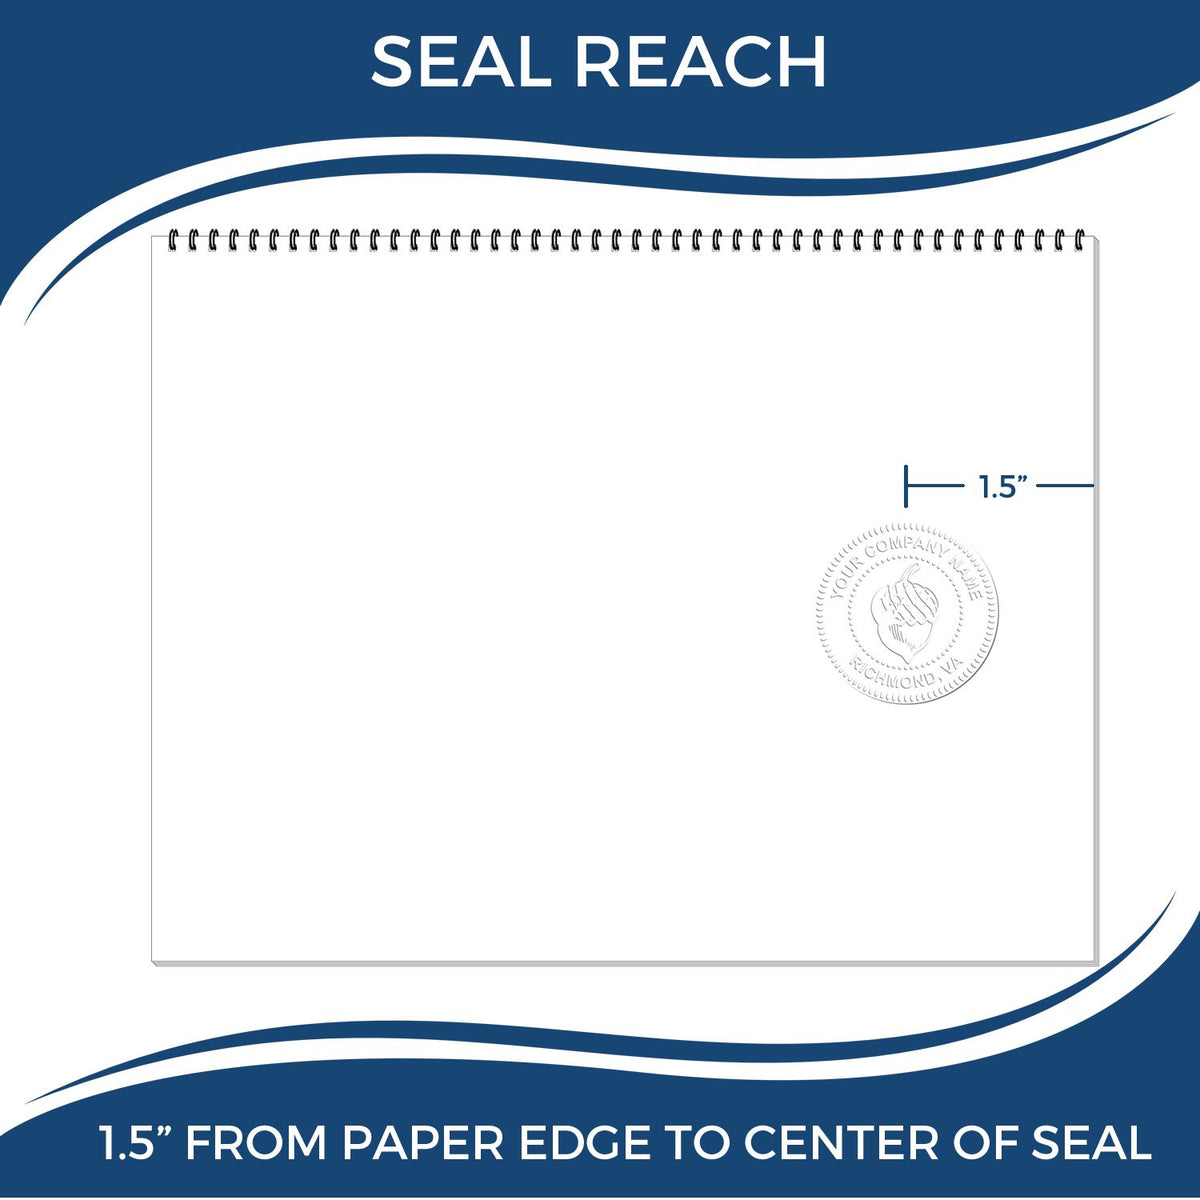 An infographic showing the seal reach which is represented by a ruler and a miniature seal image of the Handheld Texas Architect Seal Embosser